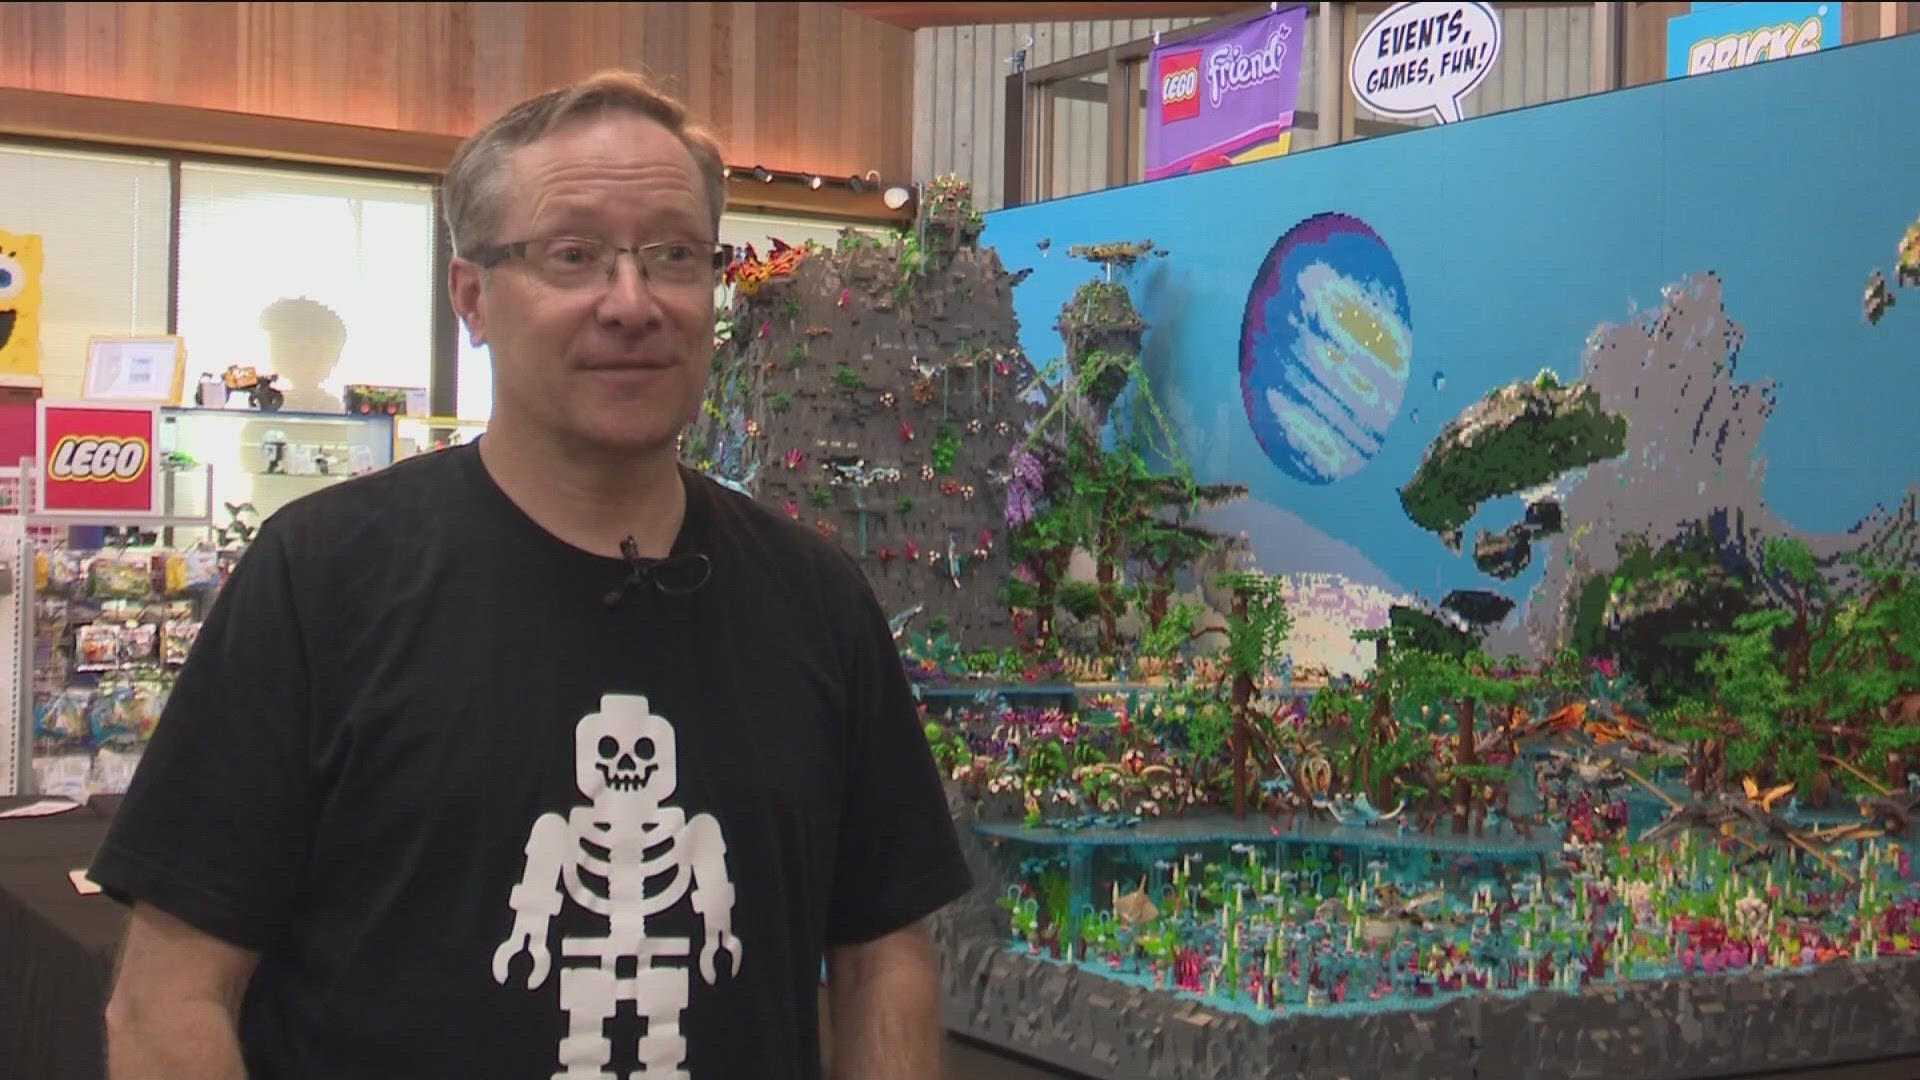 The Idaho Lego Users Group was recently given the opportunity to collaborate with LEGO, Lightstorm and Disney to create a million piece project.